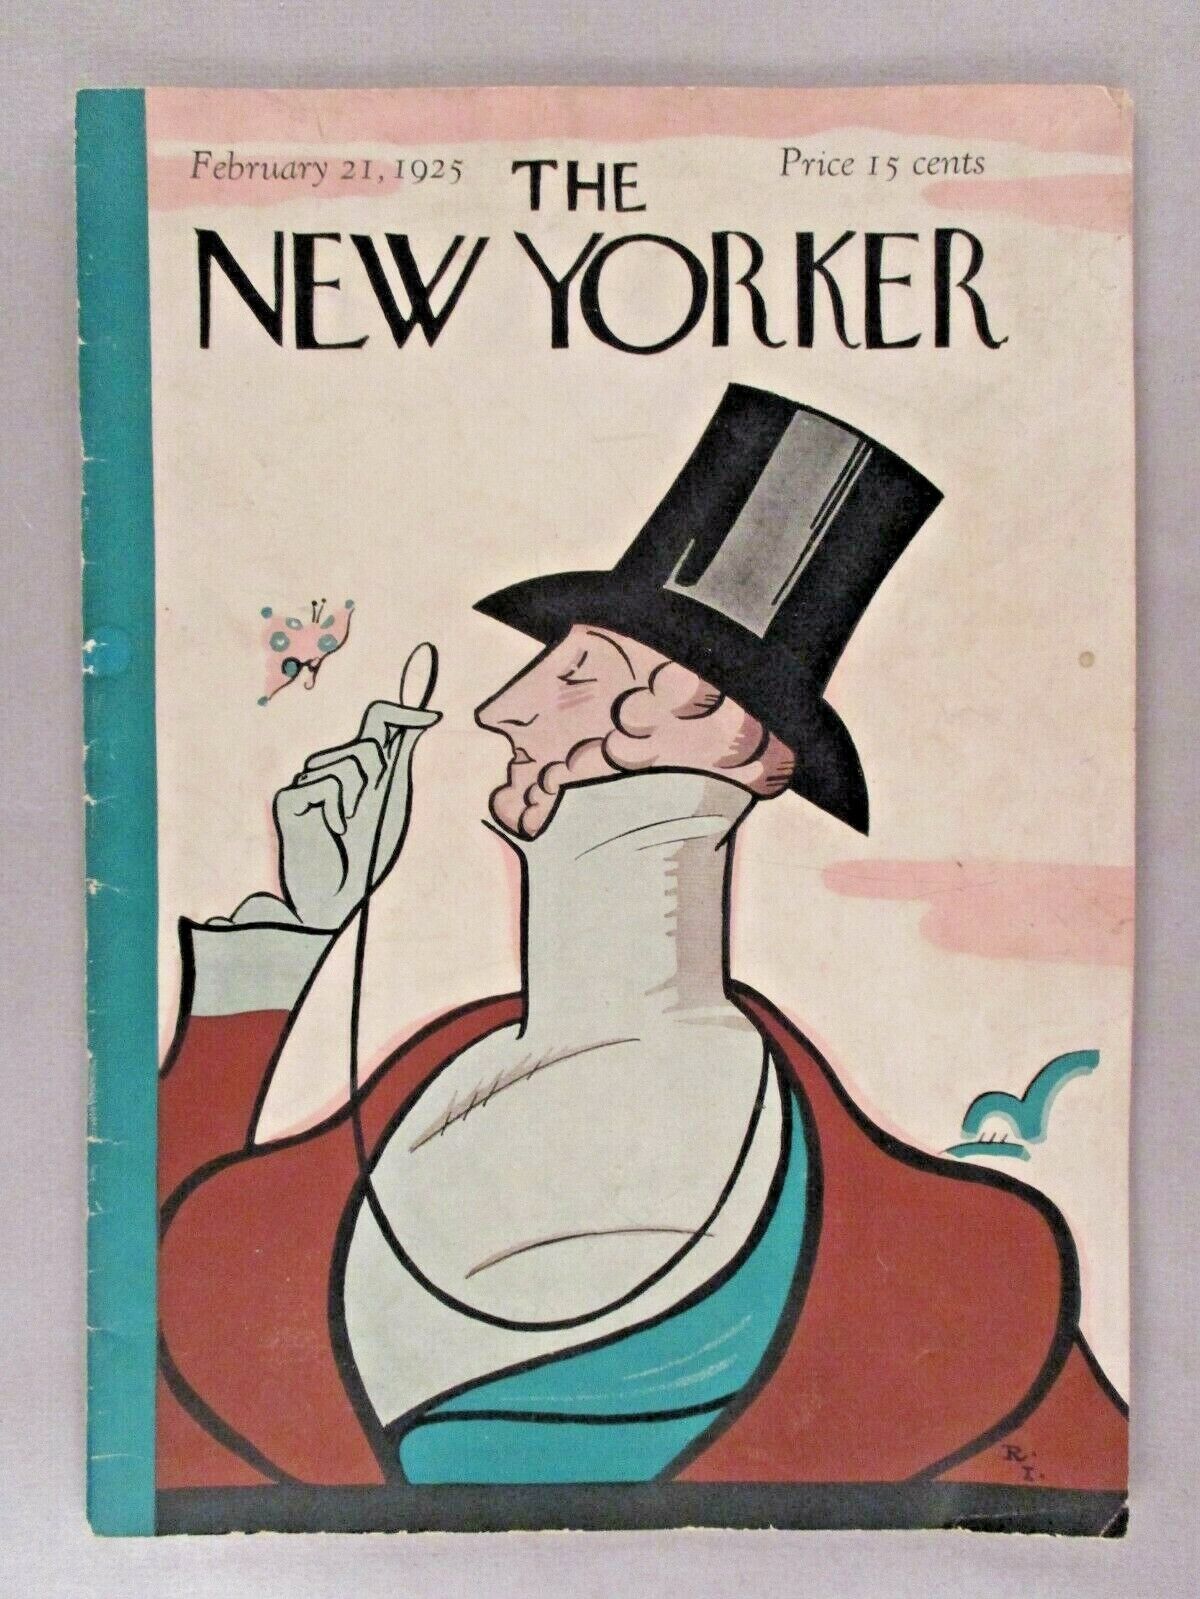 The New Yorker Magazine #1 - February 21, 1925 ~~ rare first issue